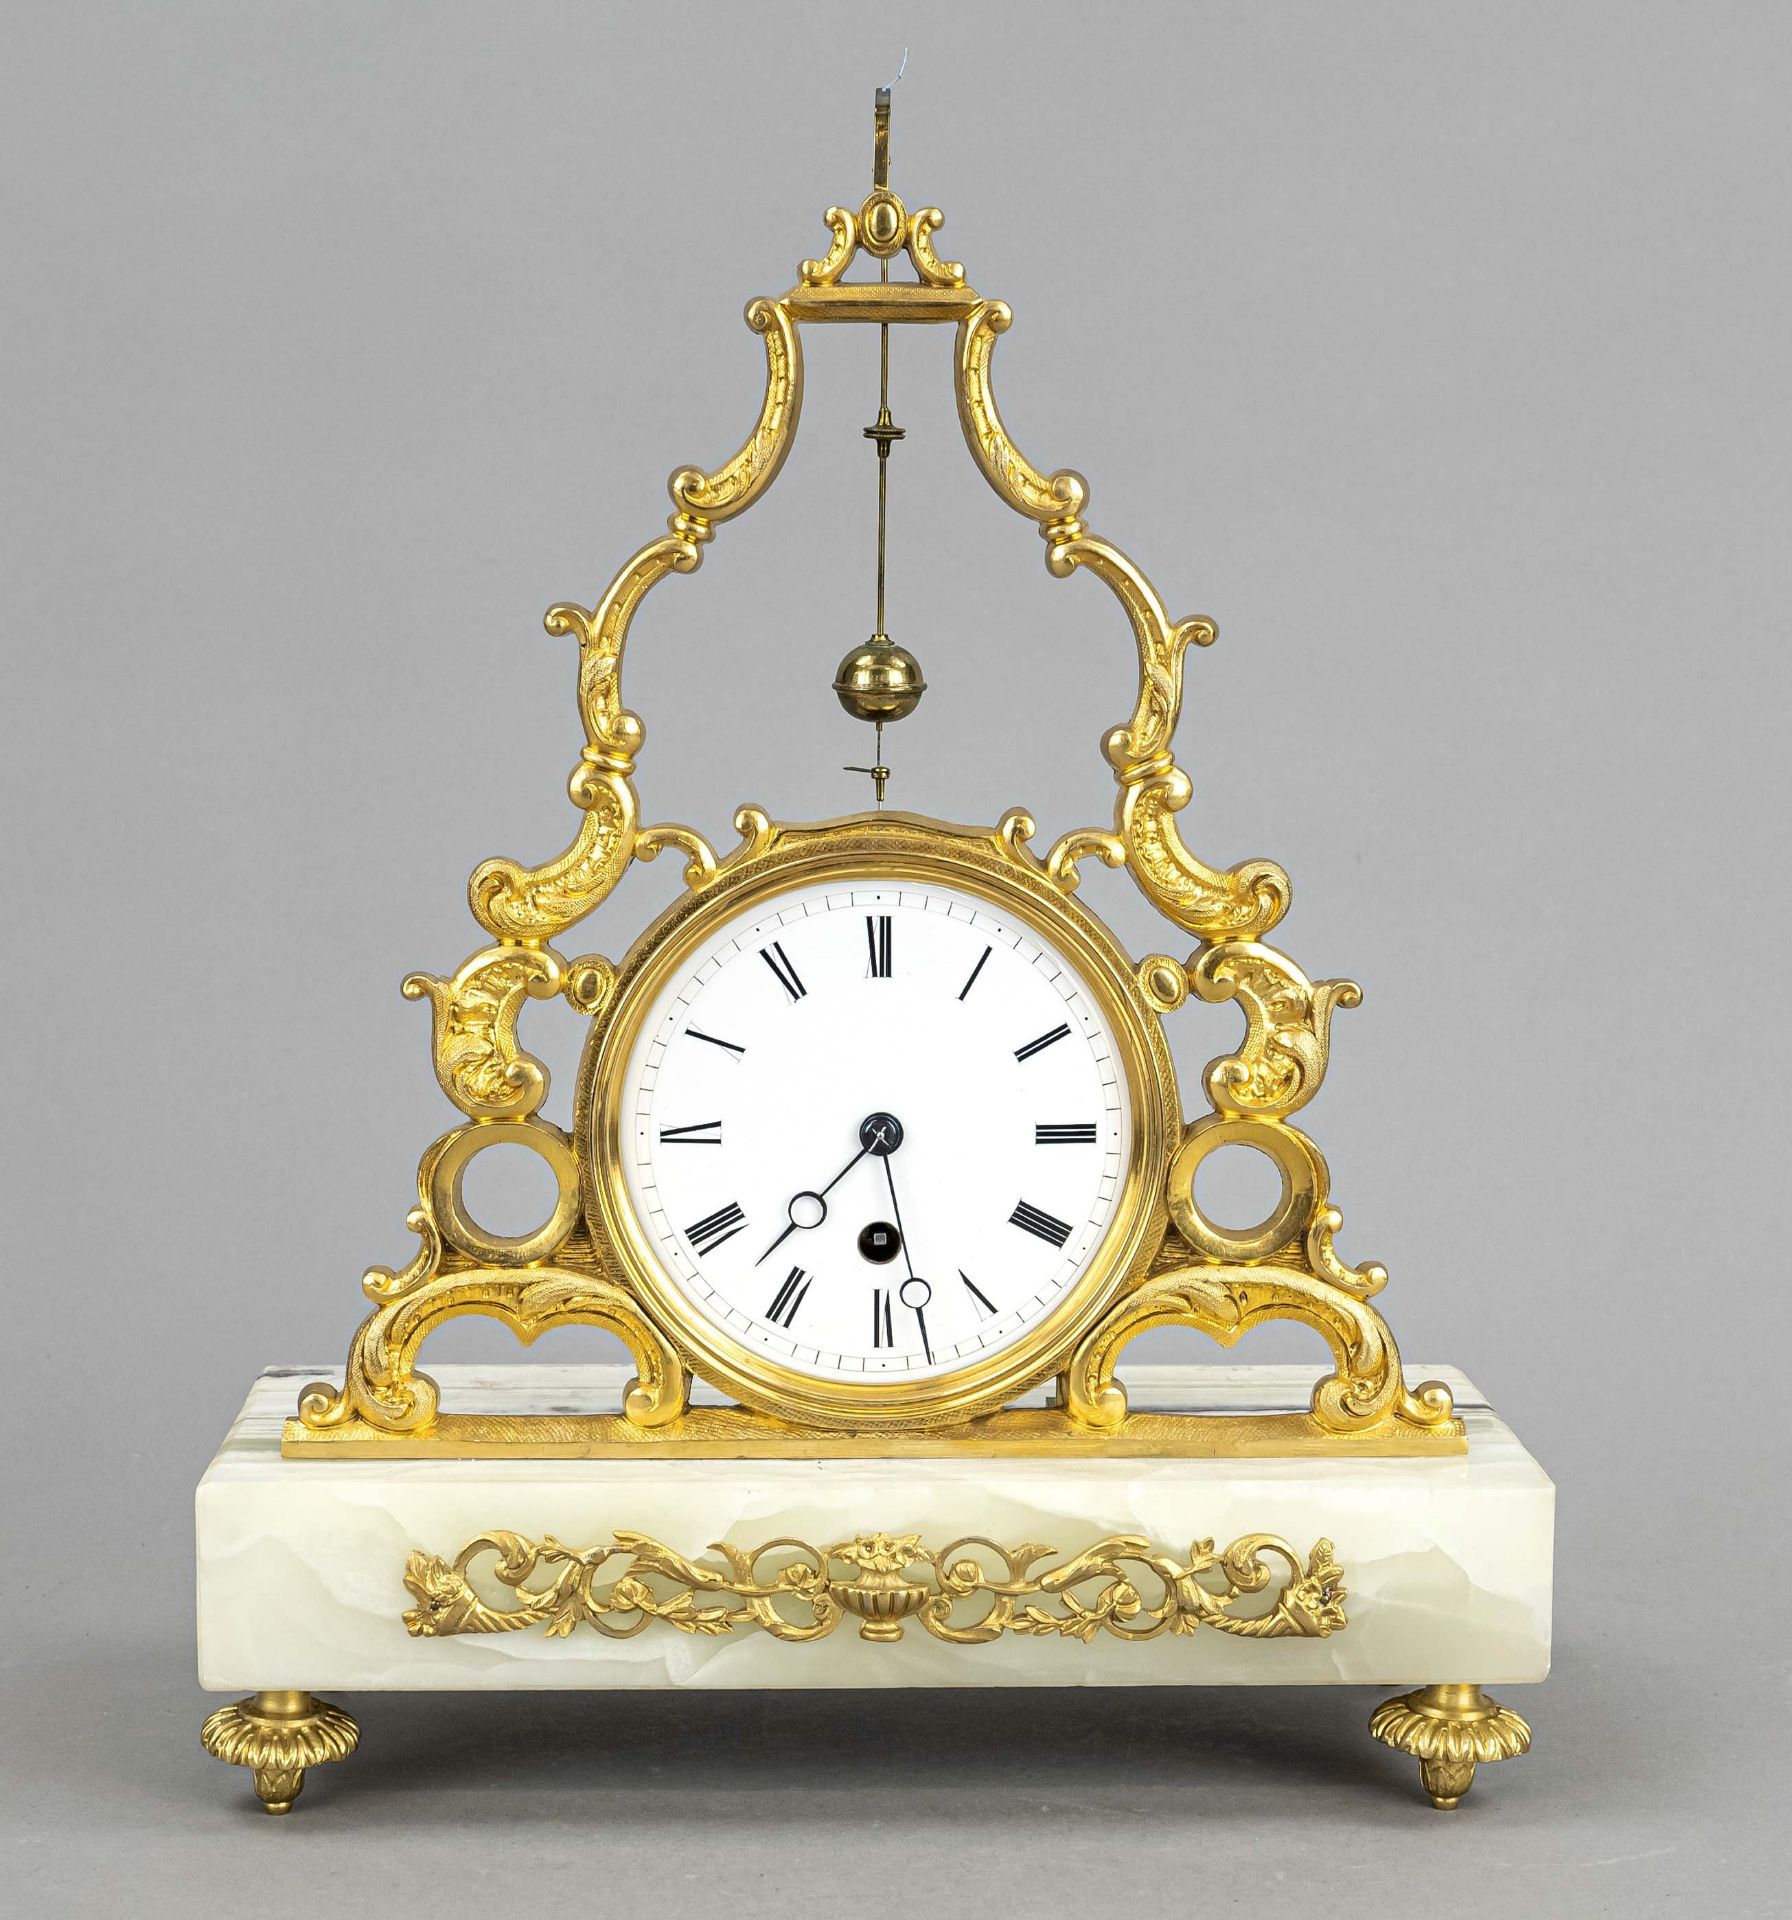 Table clock with fire-gilt body on onyx base, rocaille decorated with gilt roundels, white enamel - Image 2 of 2